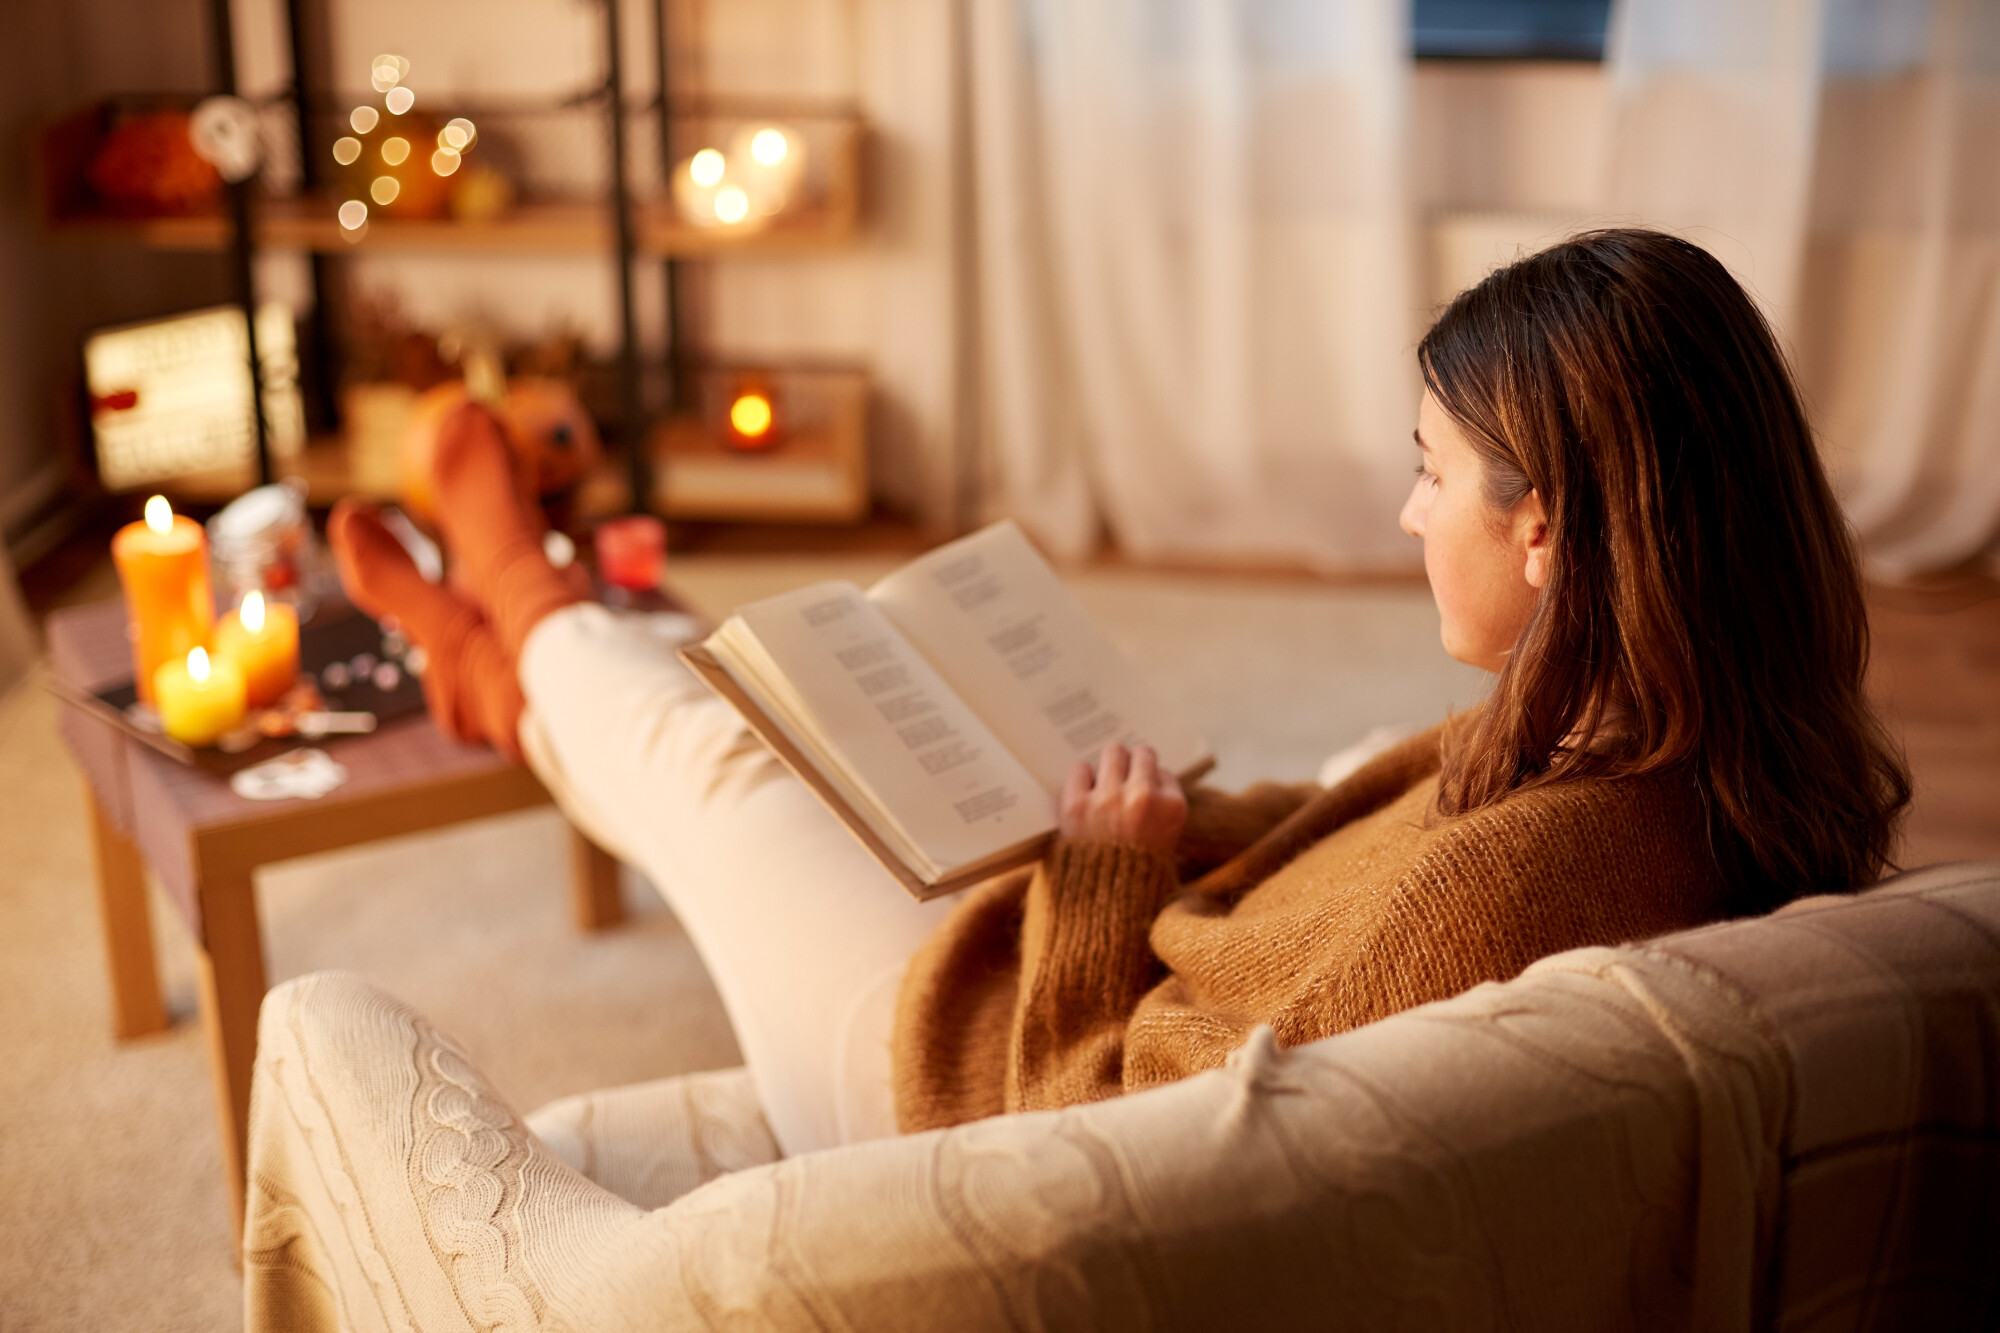 Are you looking for a few ways to make your home more warm and welcoming? Here are 12 sure ways to create a cozy home environment.